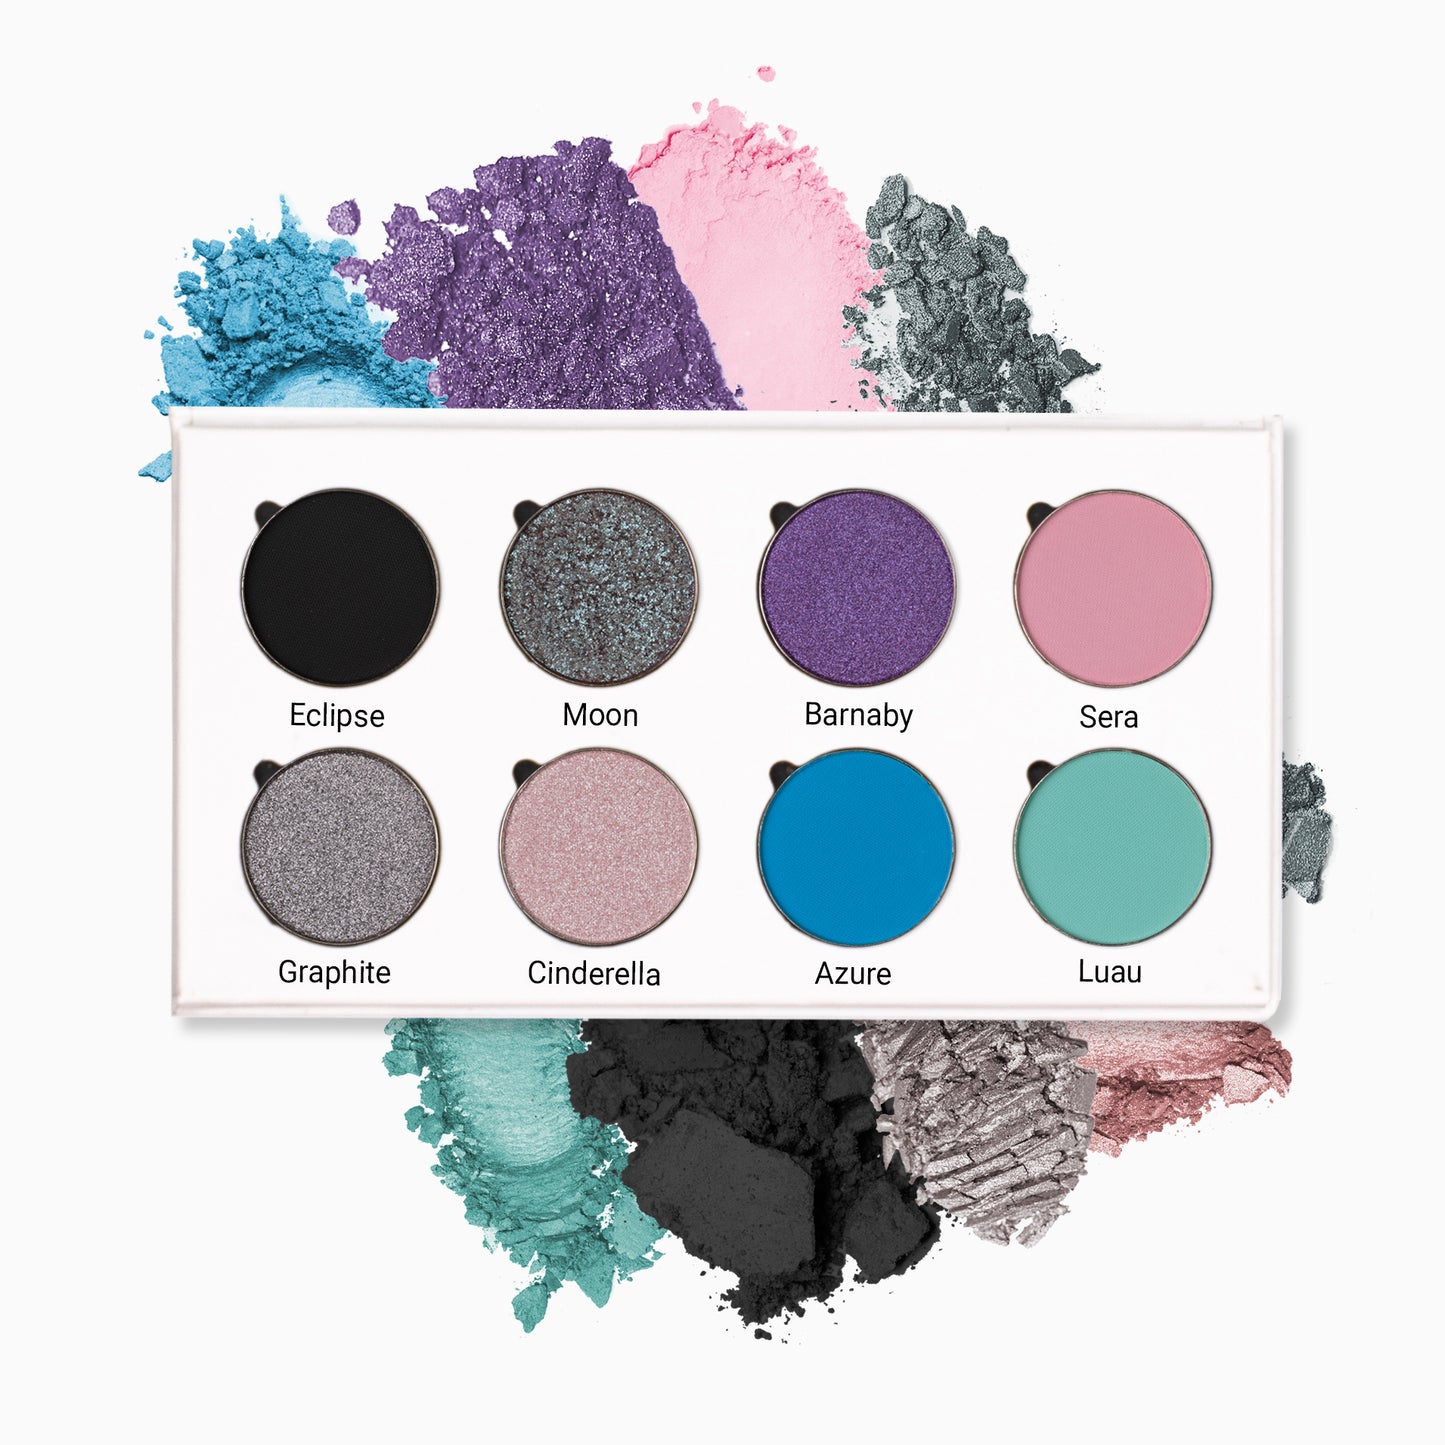 Holographic - 8 Eye Palette